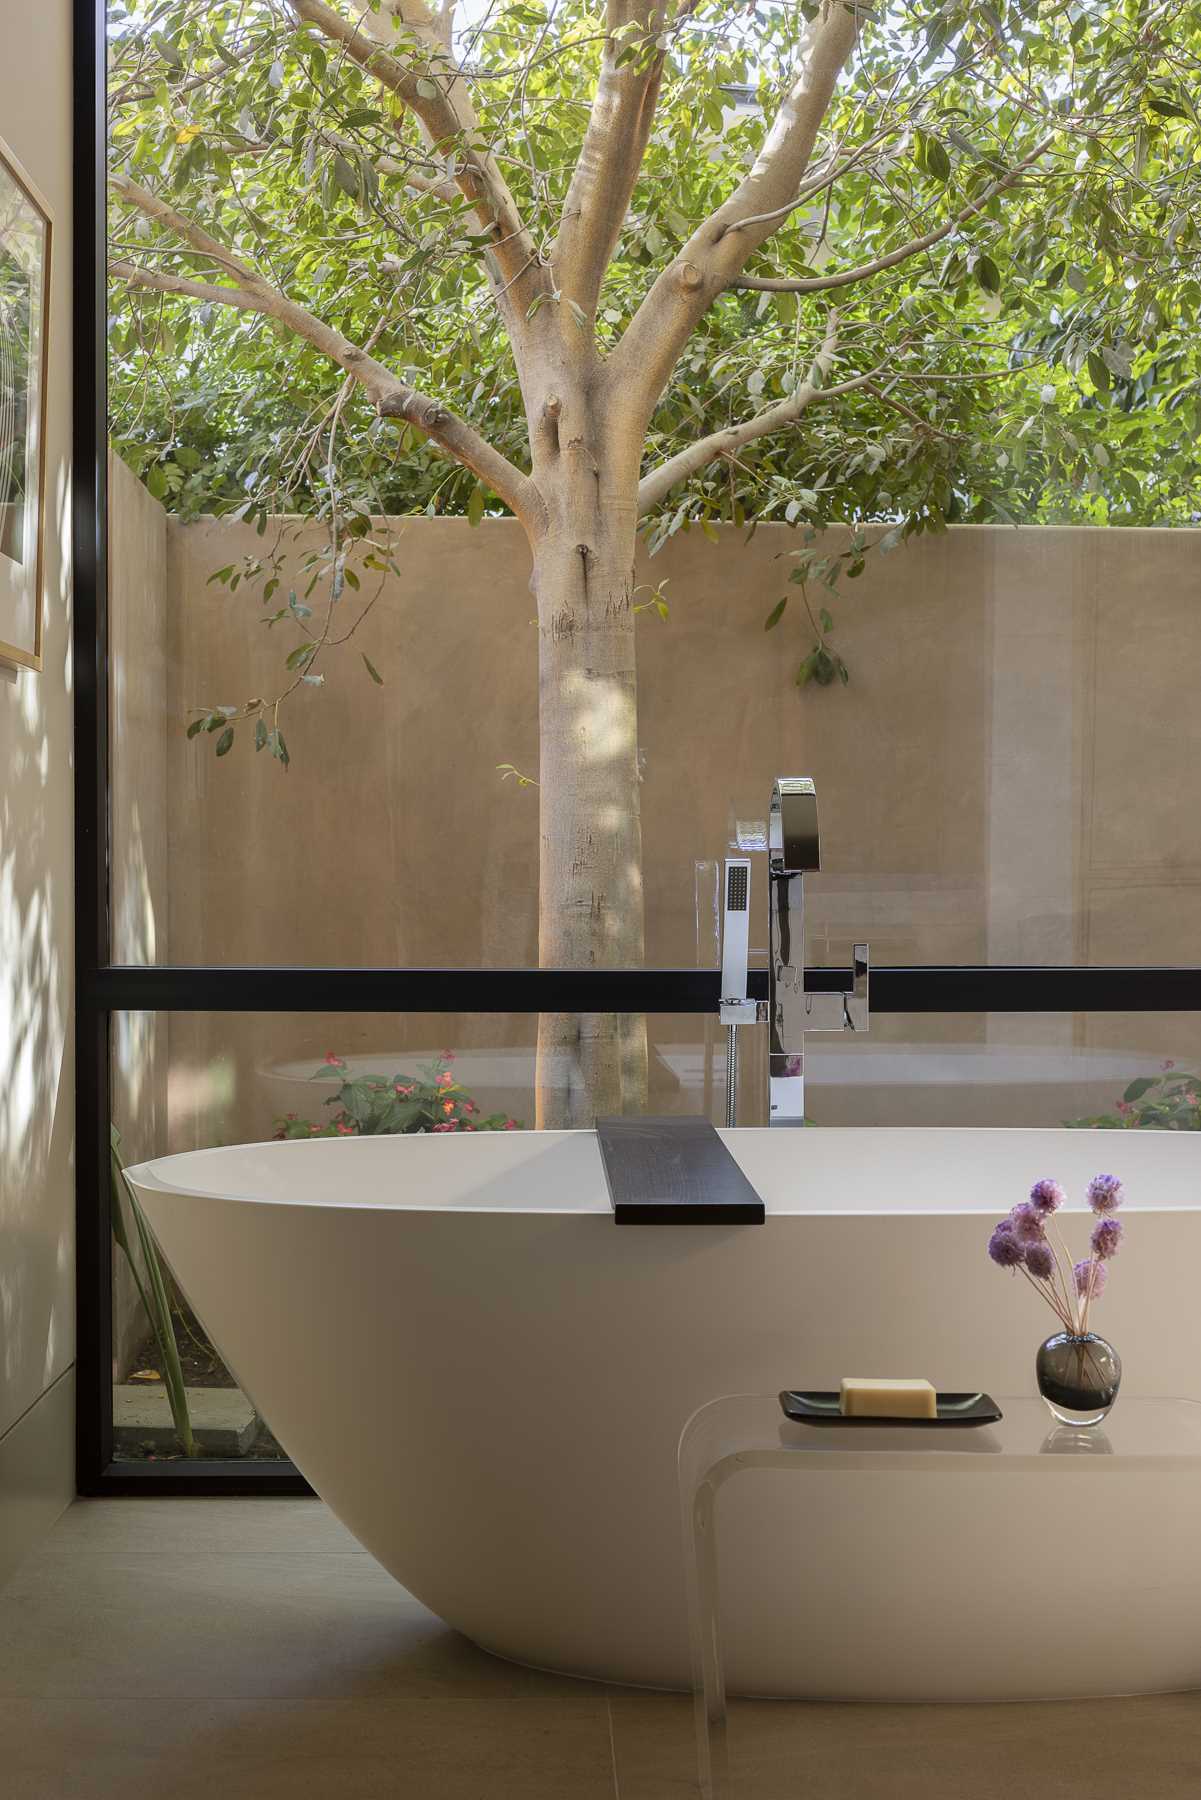 In a bathroom, skylights provide natural light, while the windows frame the tree views from the bath and the shower.